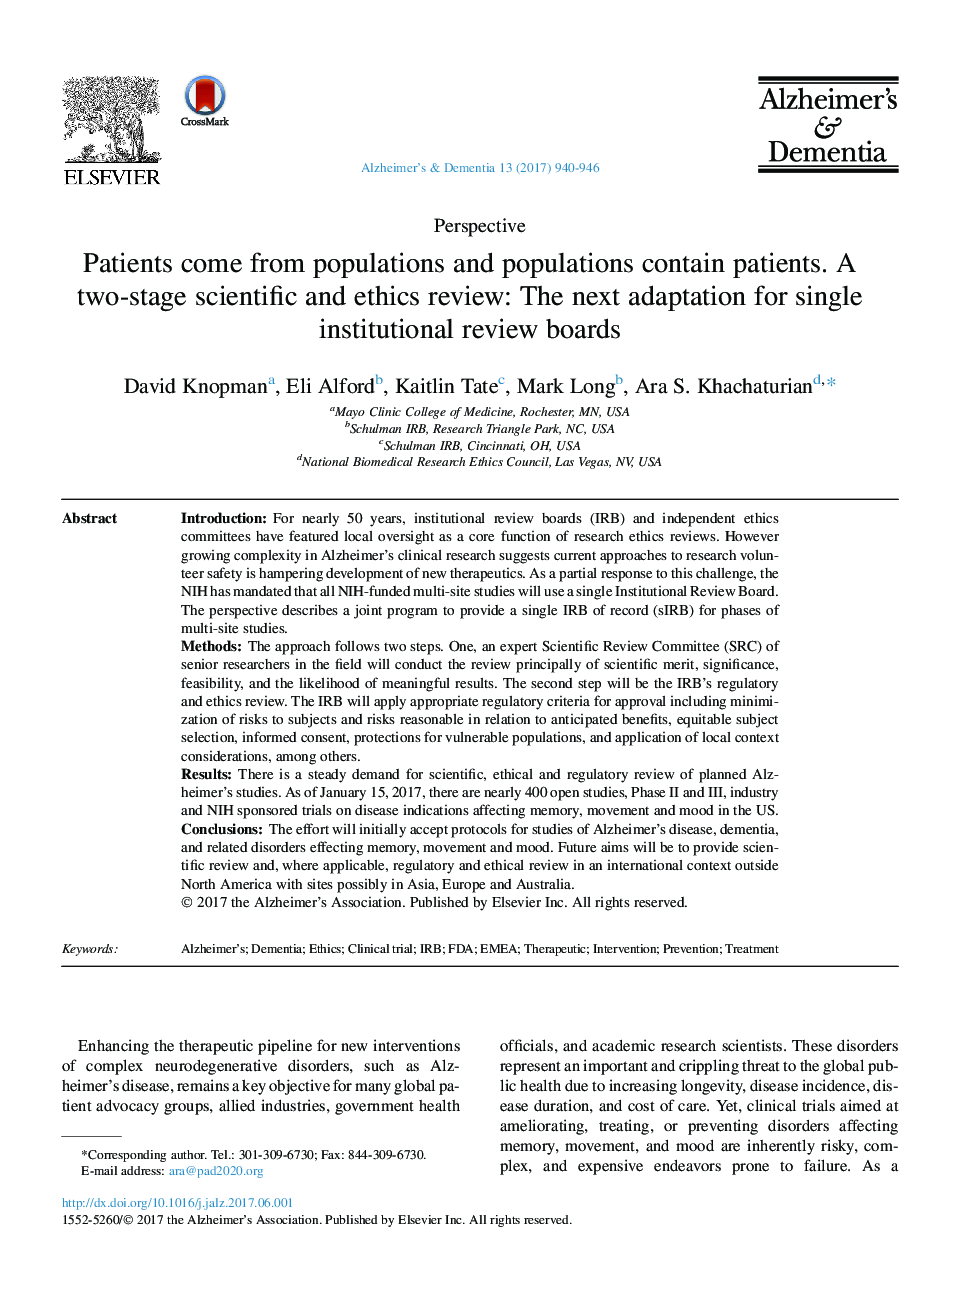 PerspectivePatients come from populations and populations contain patients. A two-stage scientific and ethics review: The next adaptation for single institutional review boards